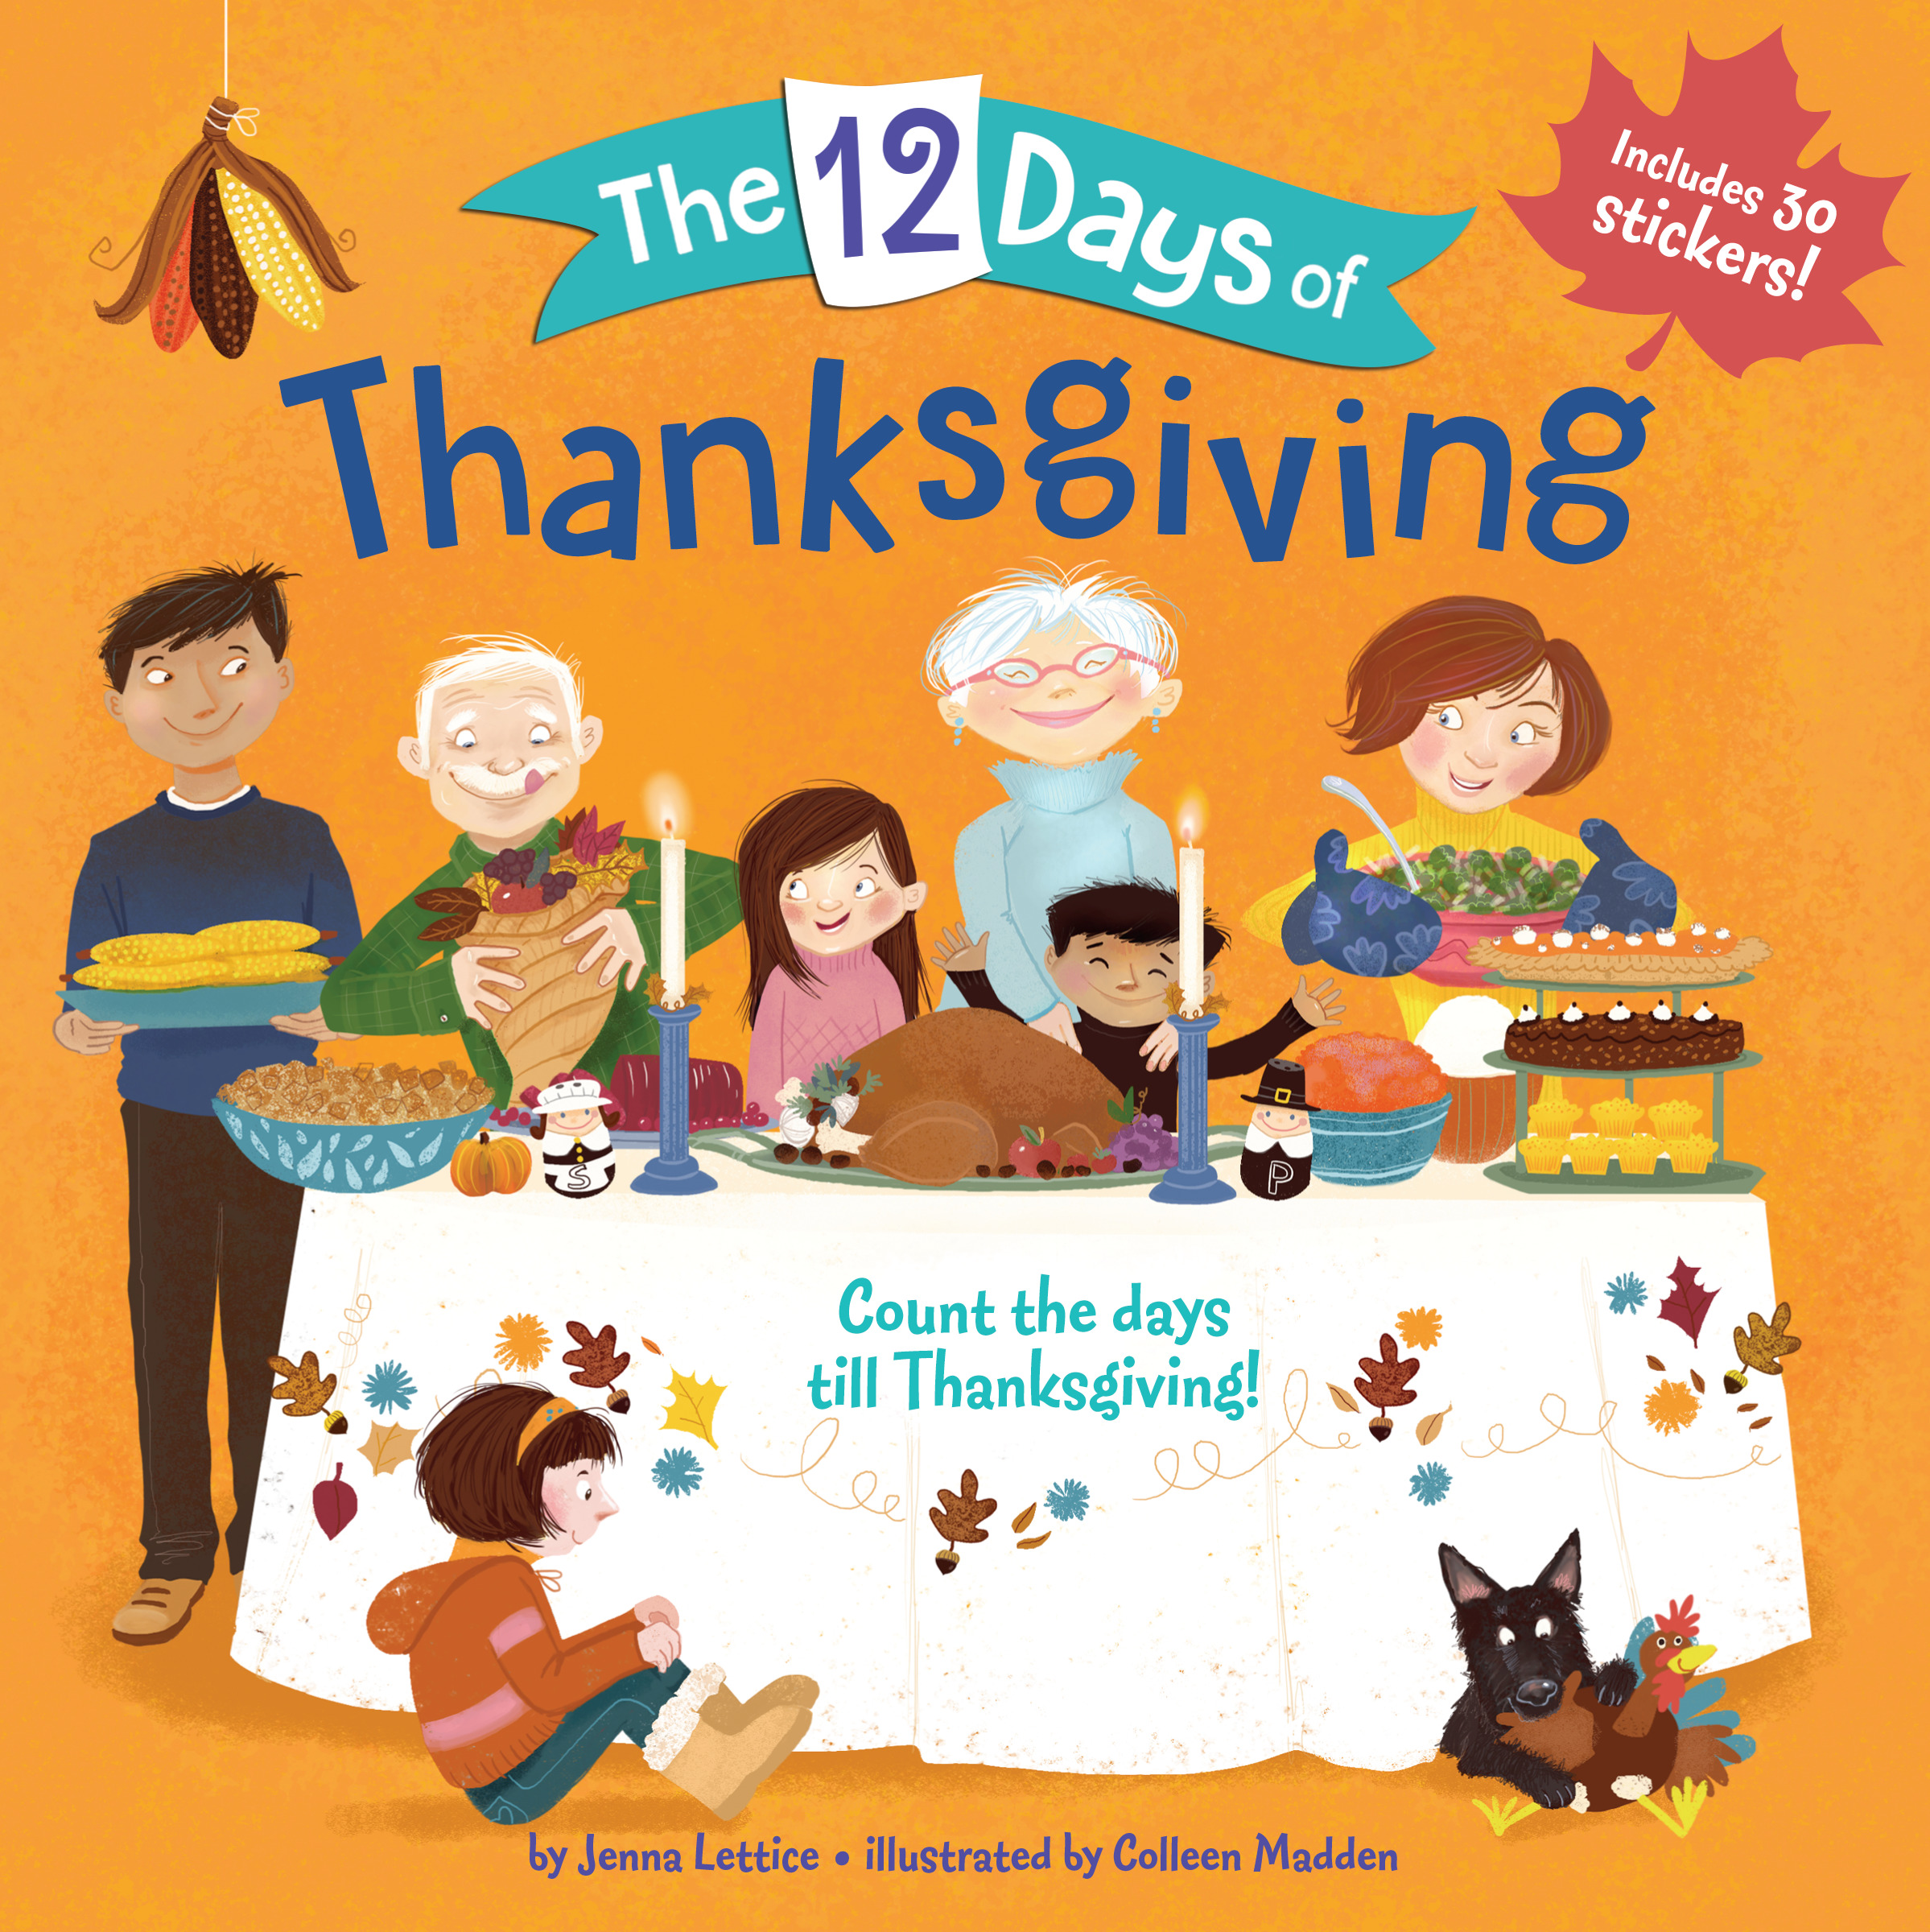 Sunday Story Time with Jenna Lettice (Author of The 12 Days of Thanksgiving)